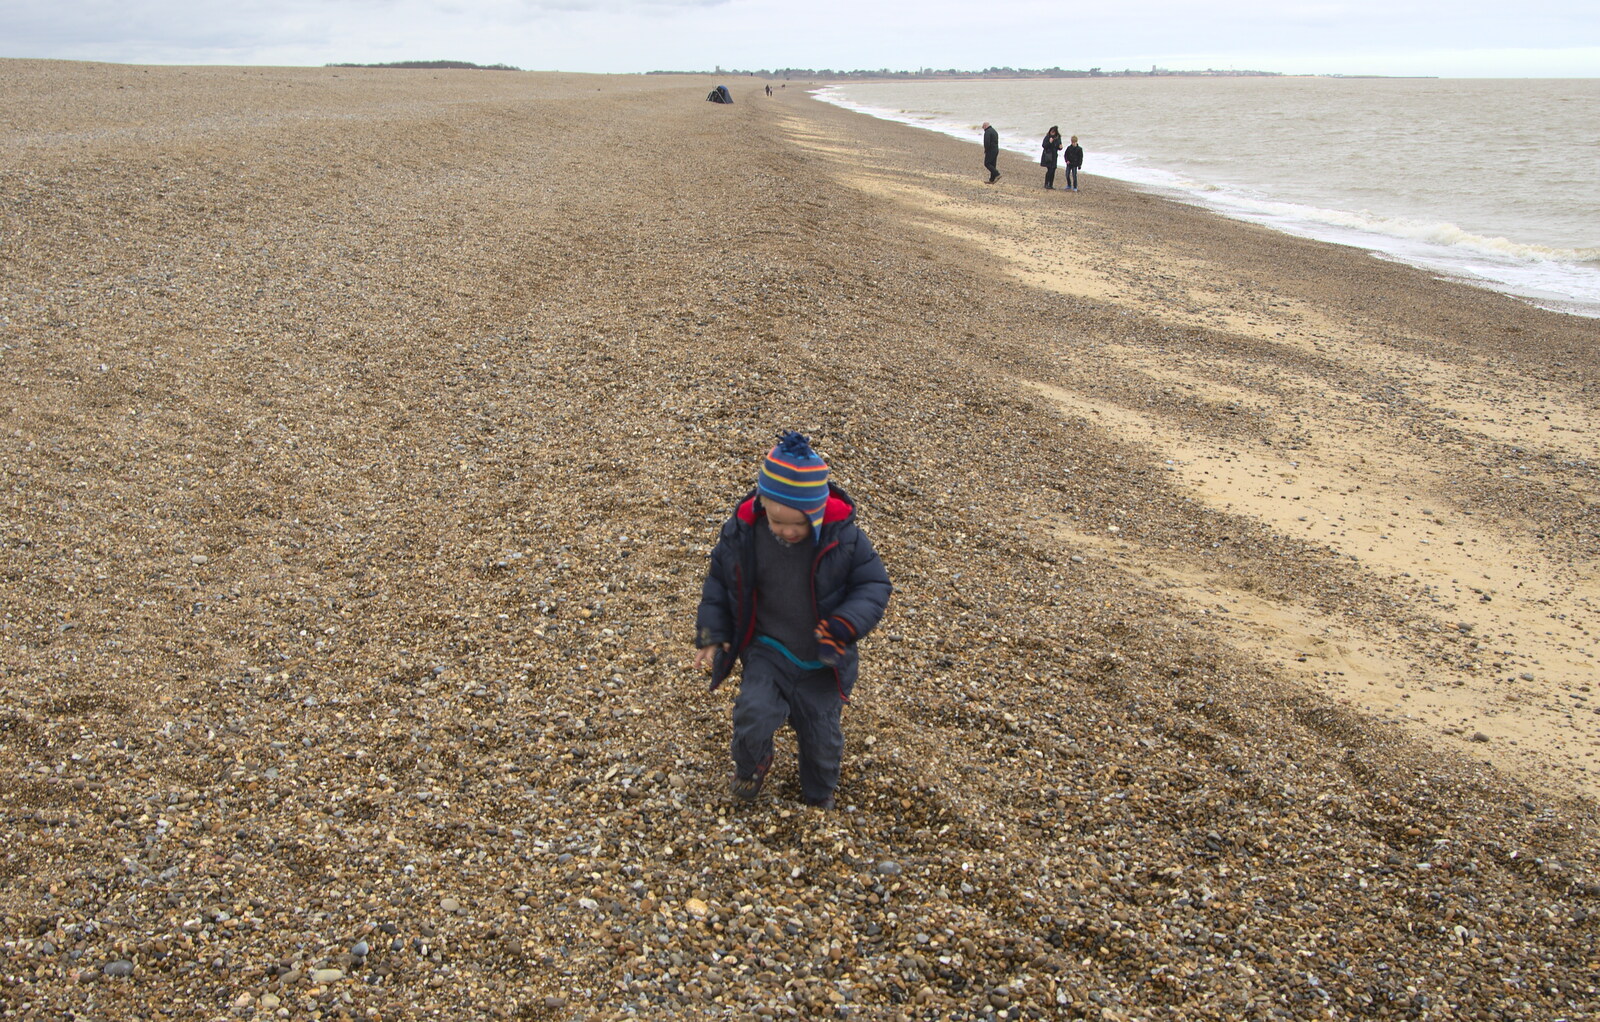 Harry on the beach from A Day on the Beach, Dunwich, Suffolk - 6th April 2015